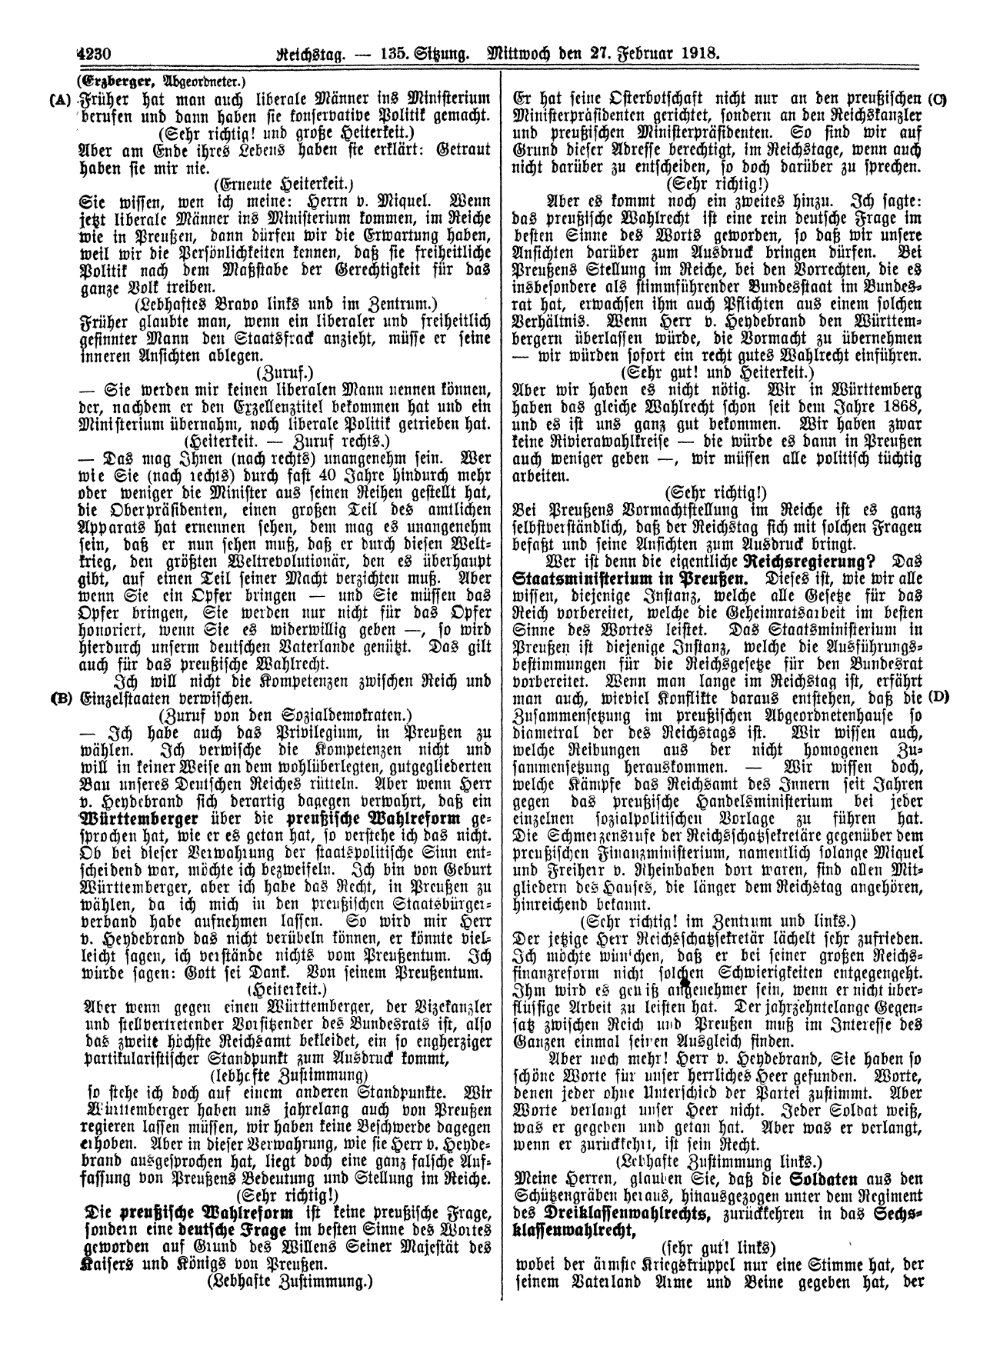 Scan of page 4230